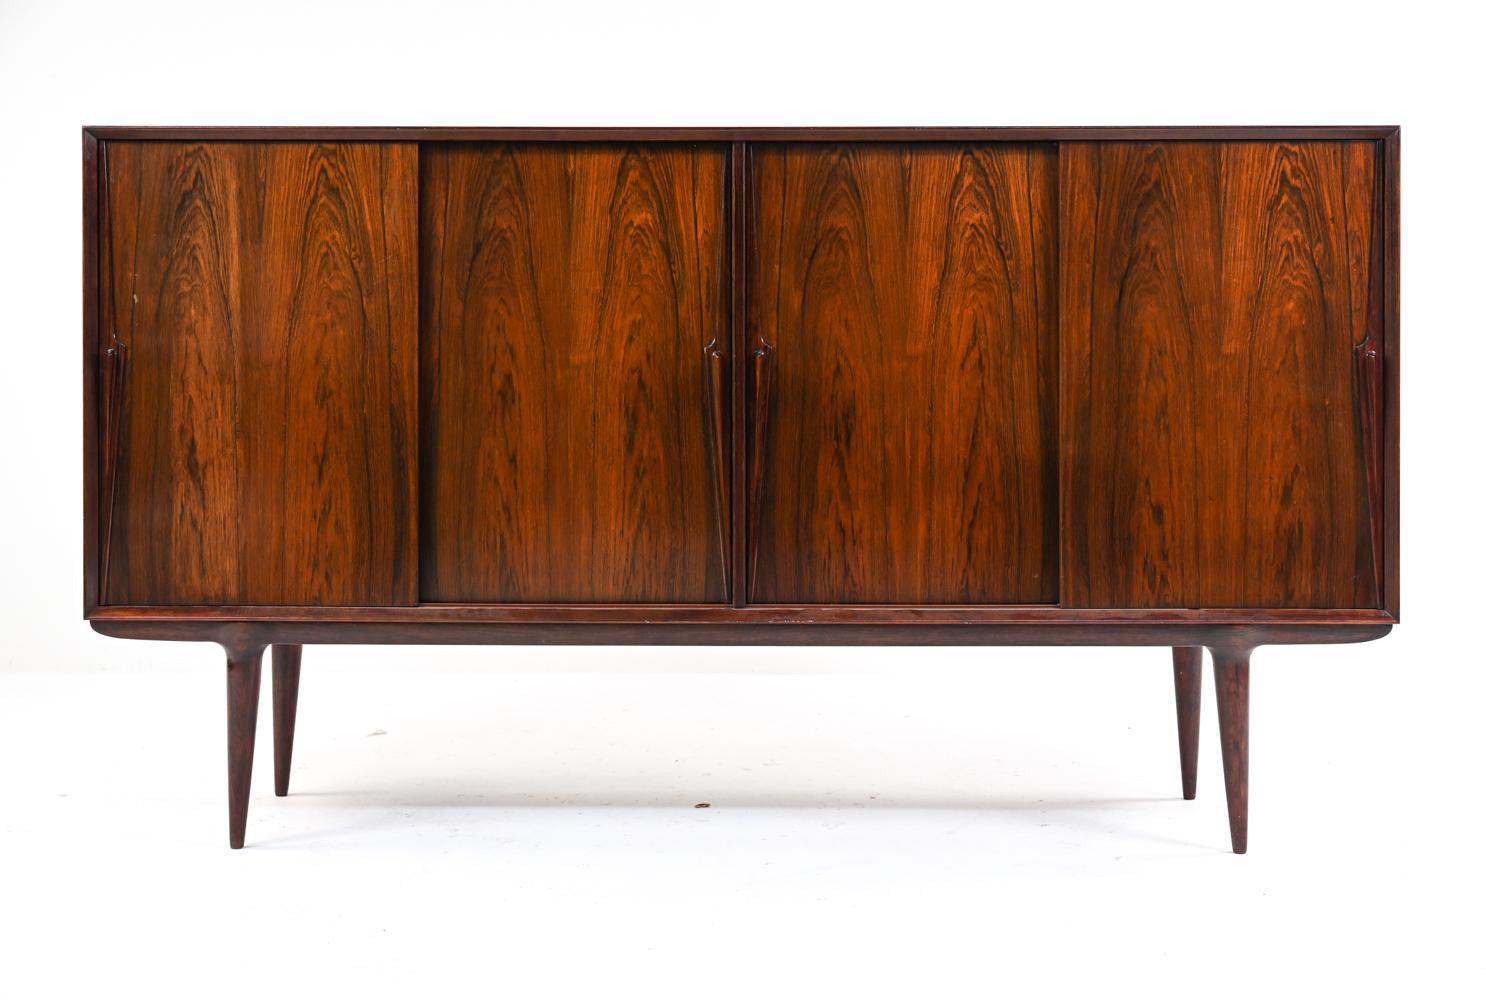 An exquisite and large buffet server or sideboard in rosewood, with sculptural handled sliding doors, ample storage shelves, and adjustable modular flatware trays. Unknown Danish maker, c. 1960's.